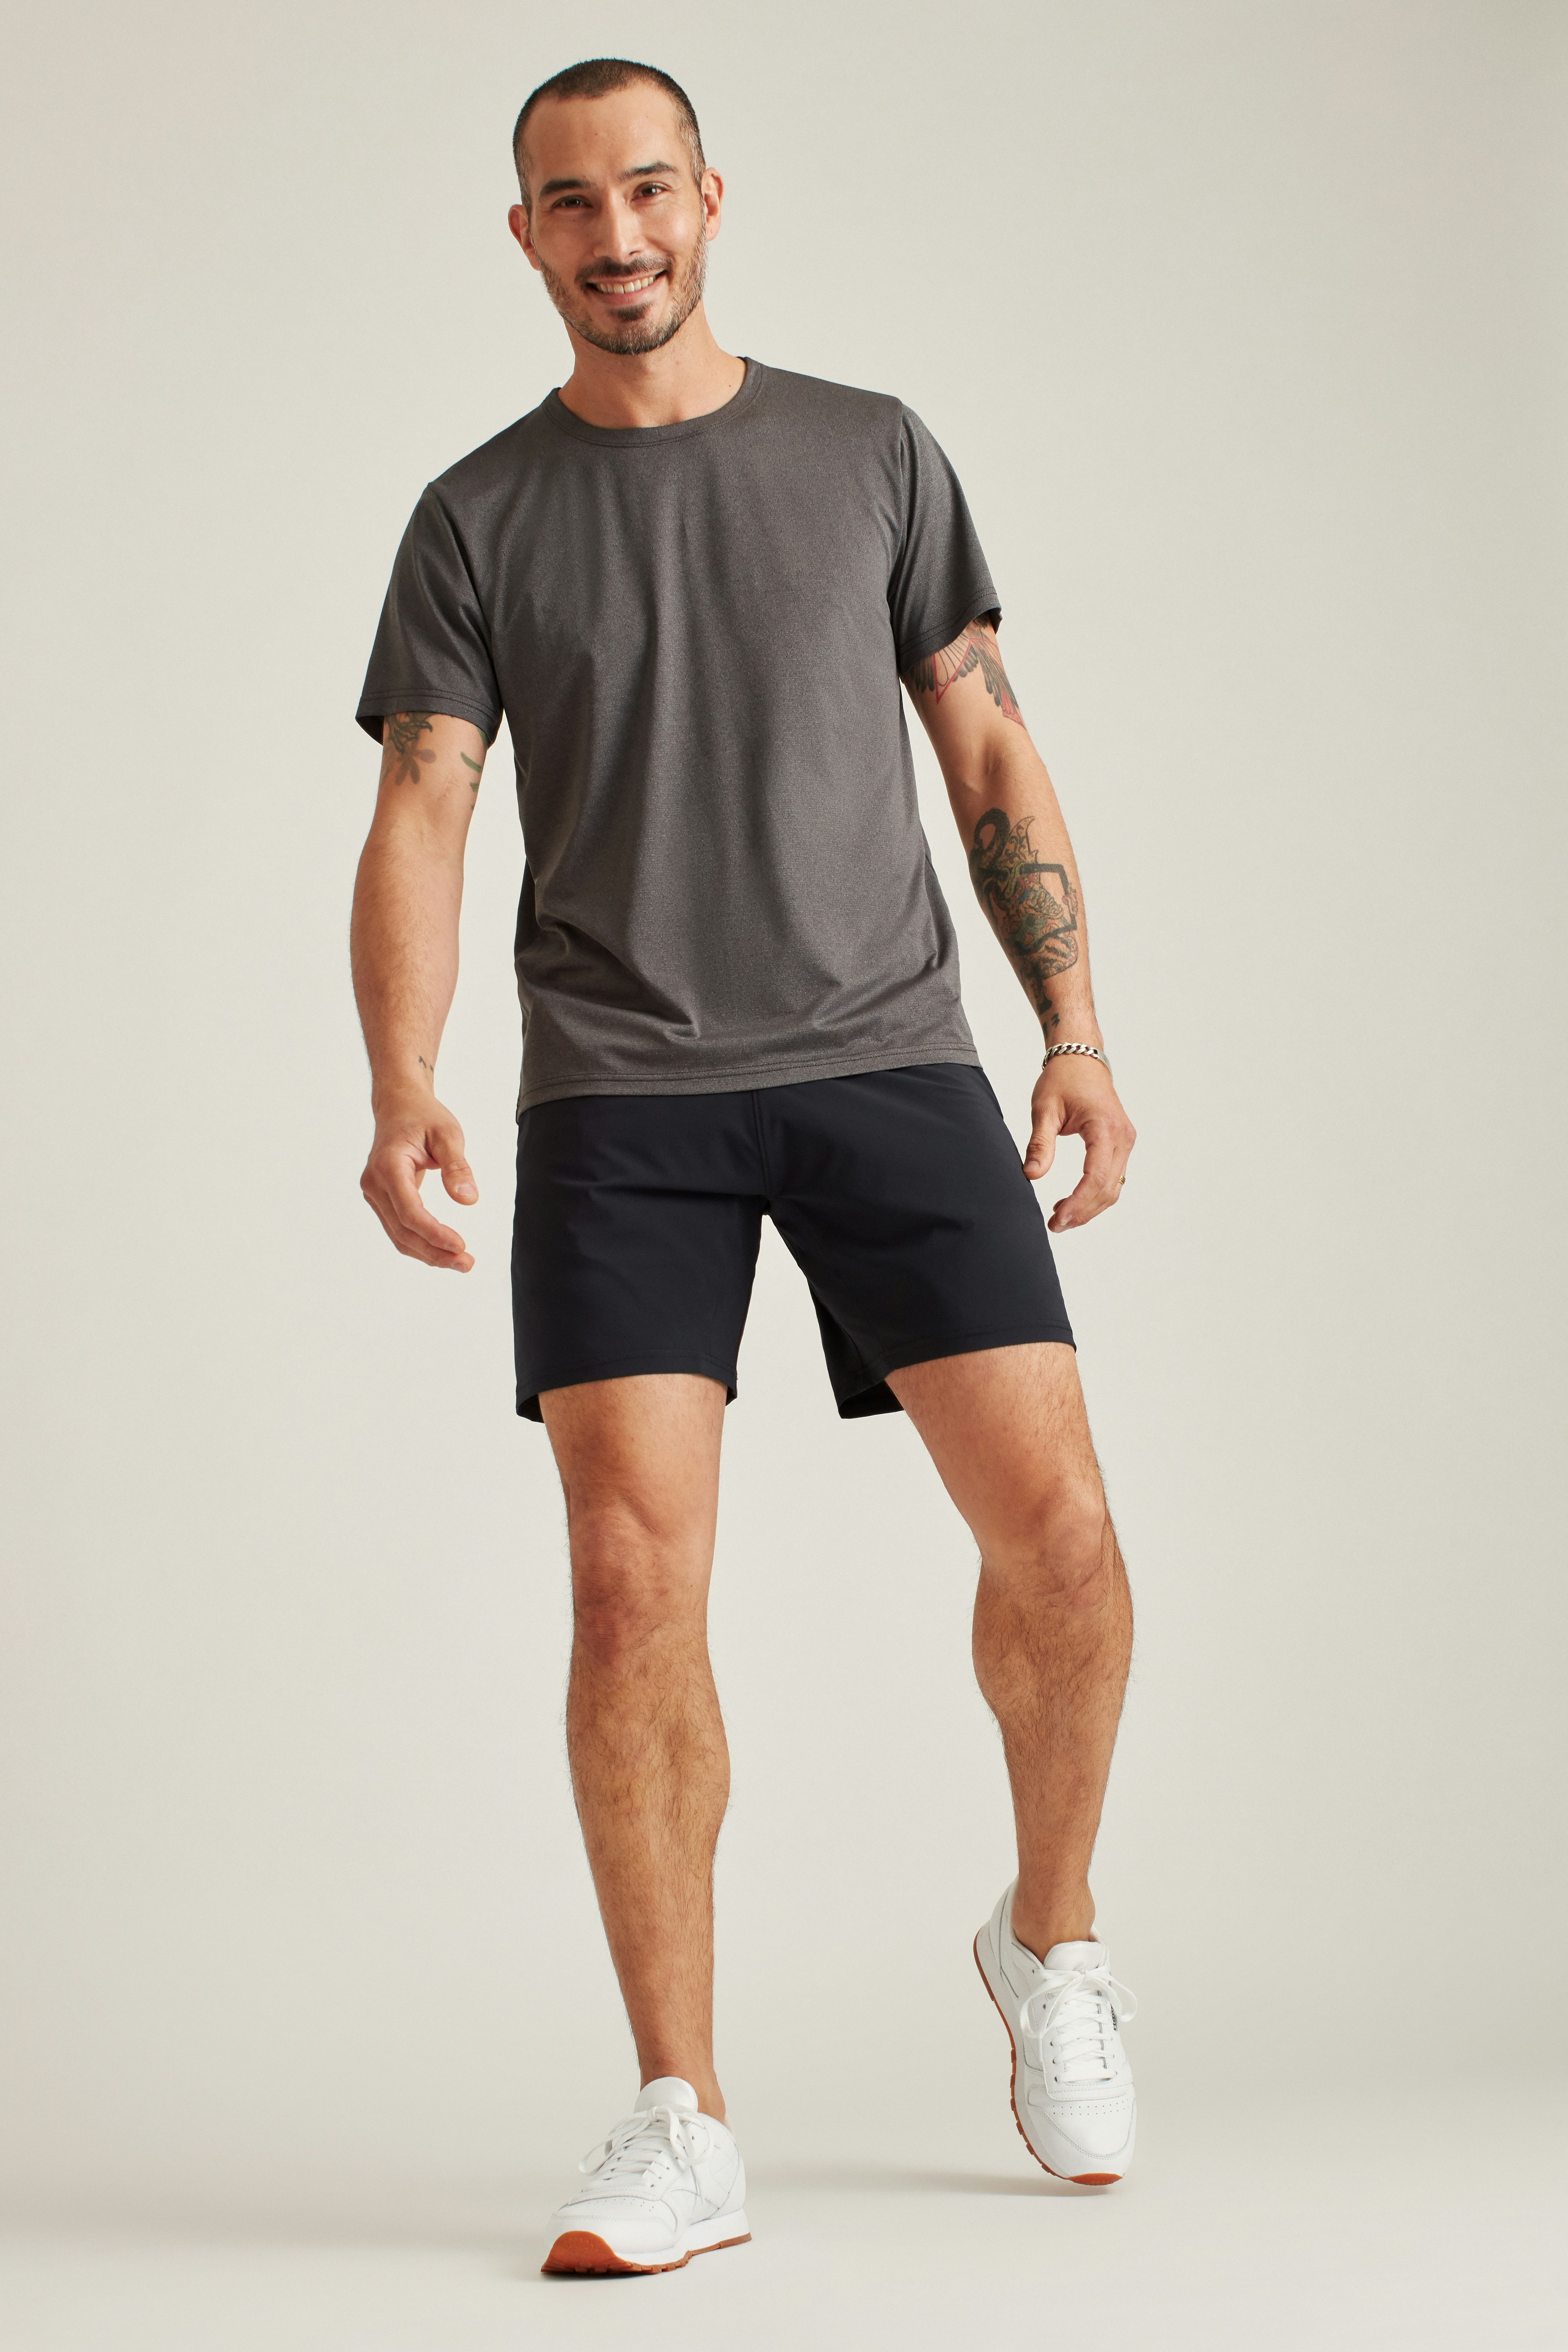 The Unlined Gym Short